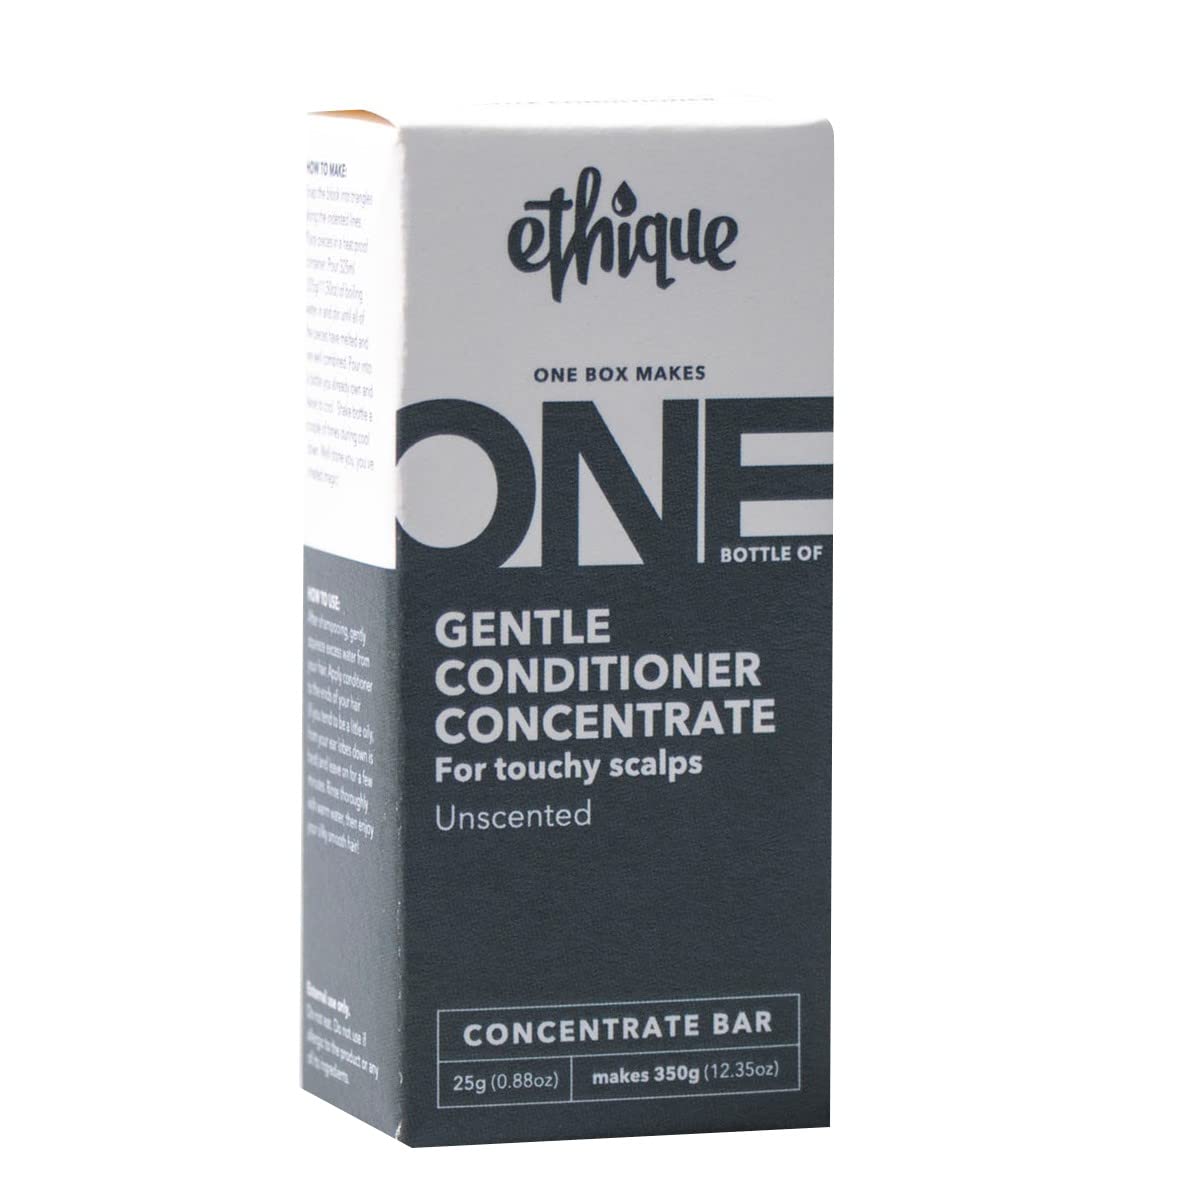 Ethique Gentle Conditioner Concentrate (For touchy scalps Conditioner)